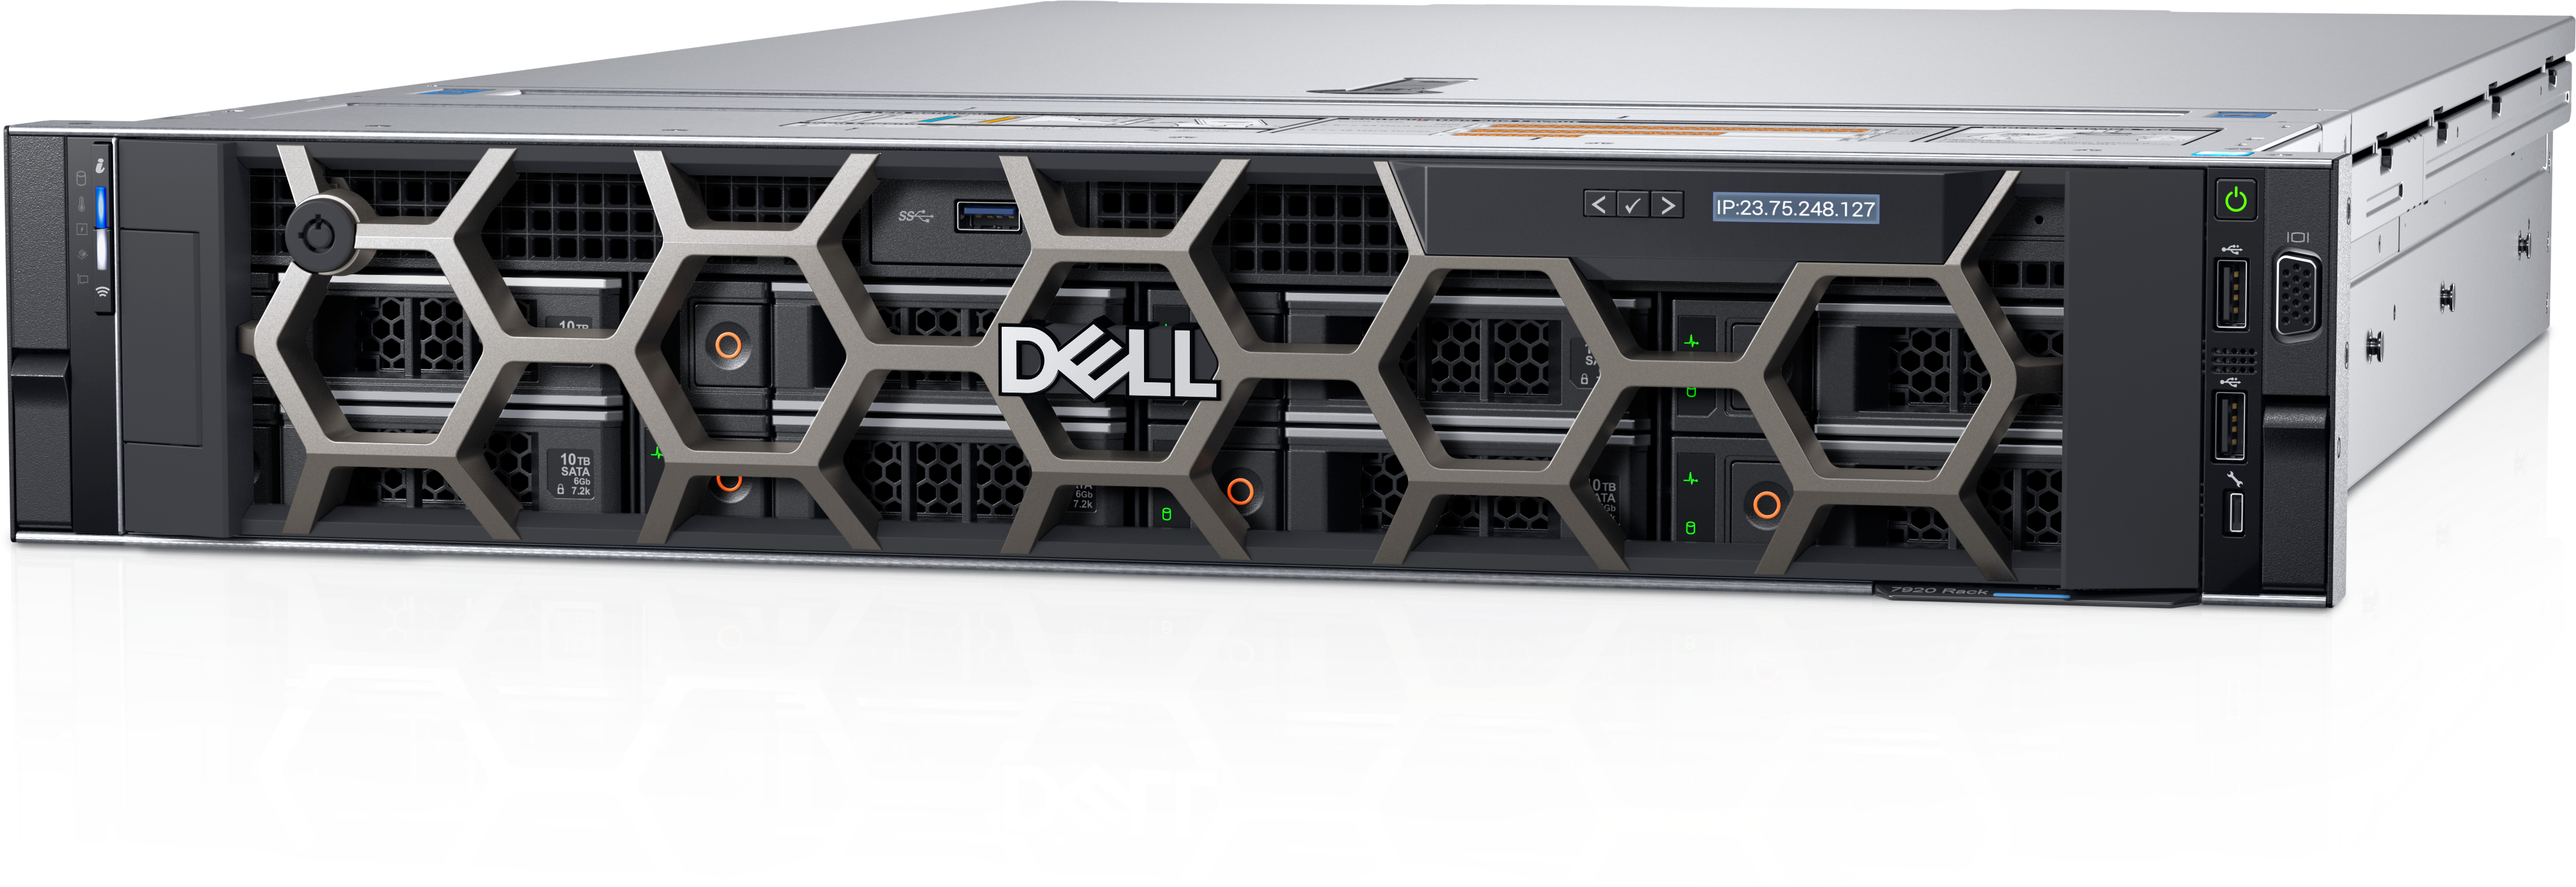 Precision 7920 Rack Workstation with Intel Xeon Processor | Dell Hong Kong